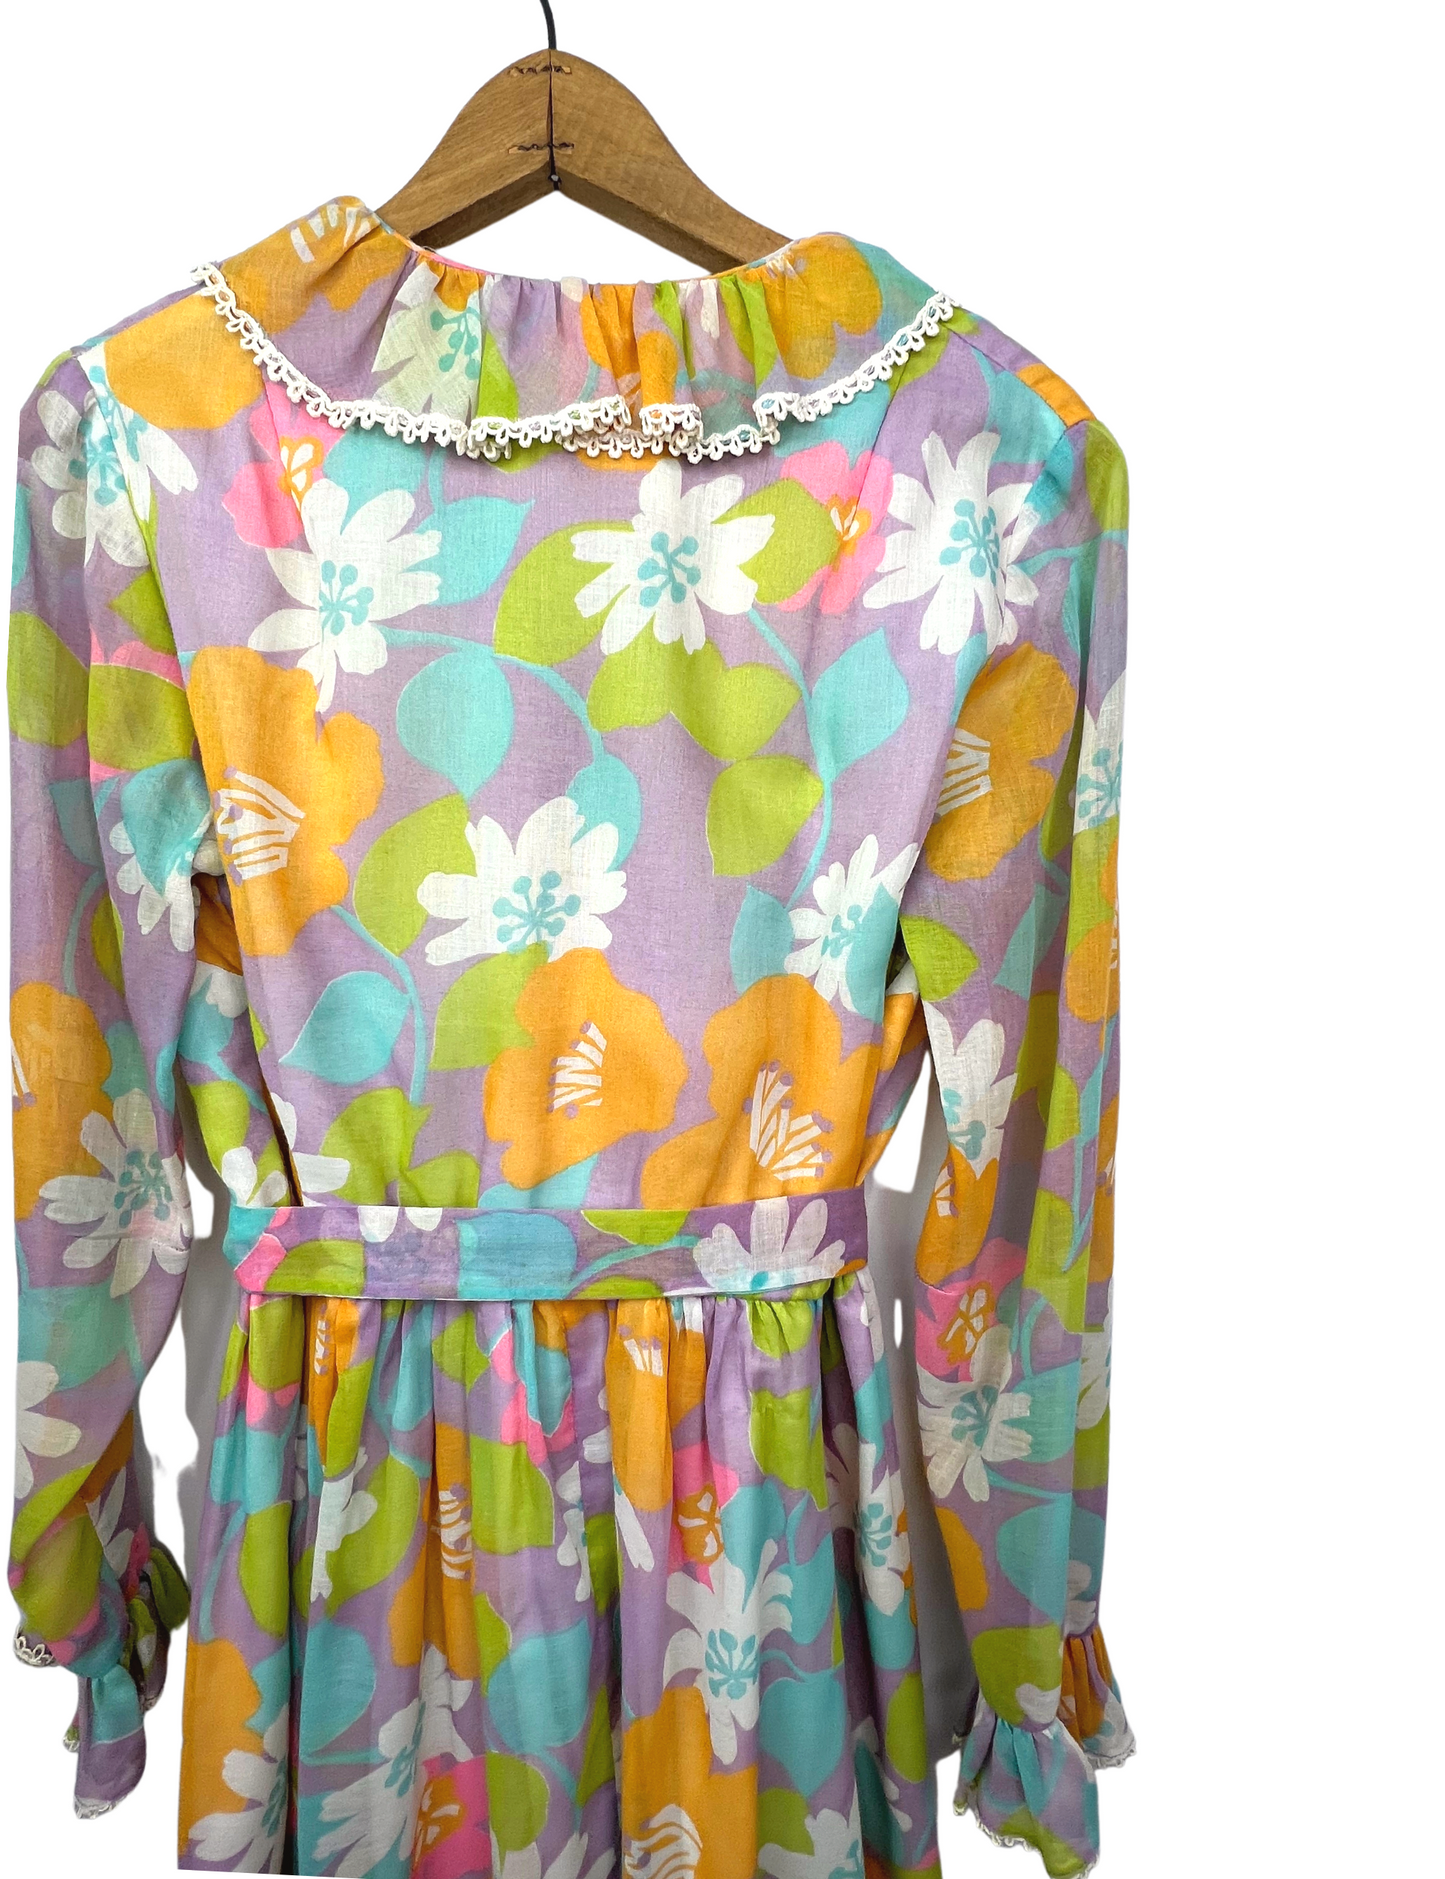 1960’s Carol Brent Montgomery Ward Frilly Hippie Floral Belted Shirt Dress